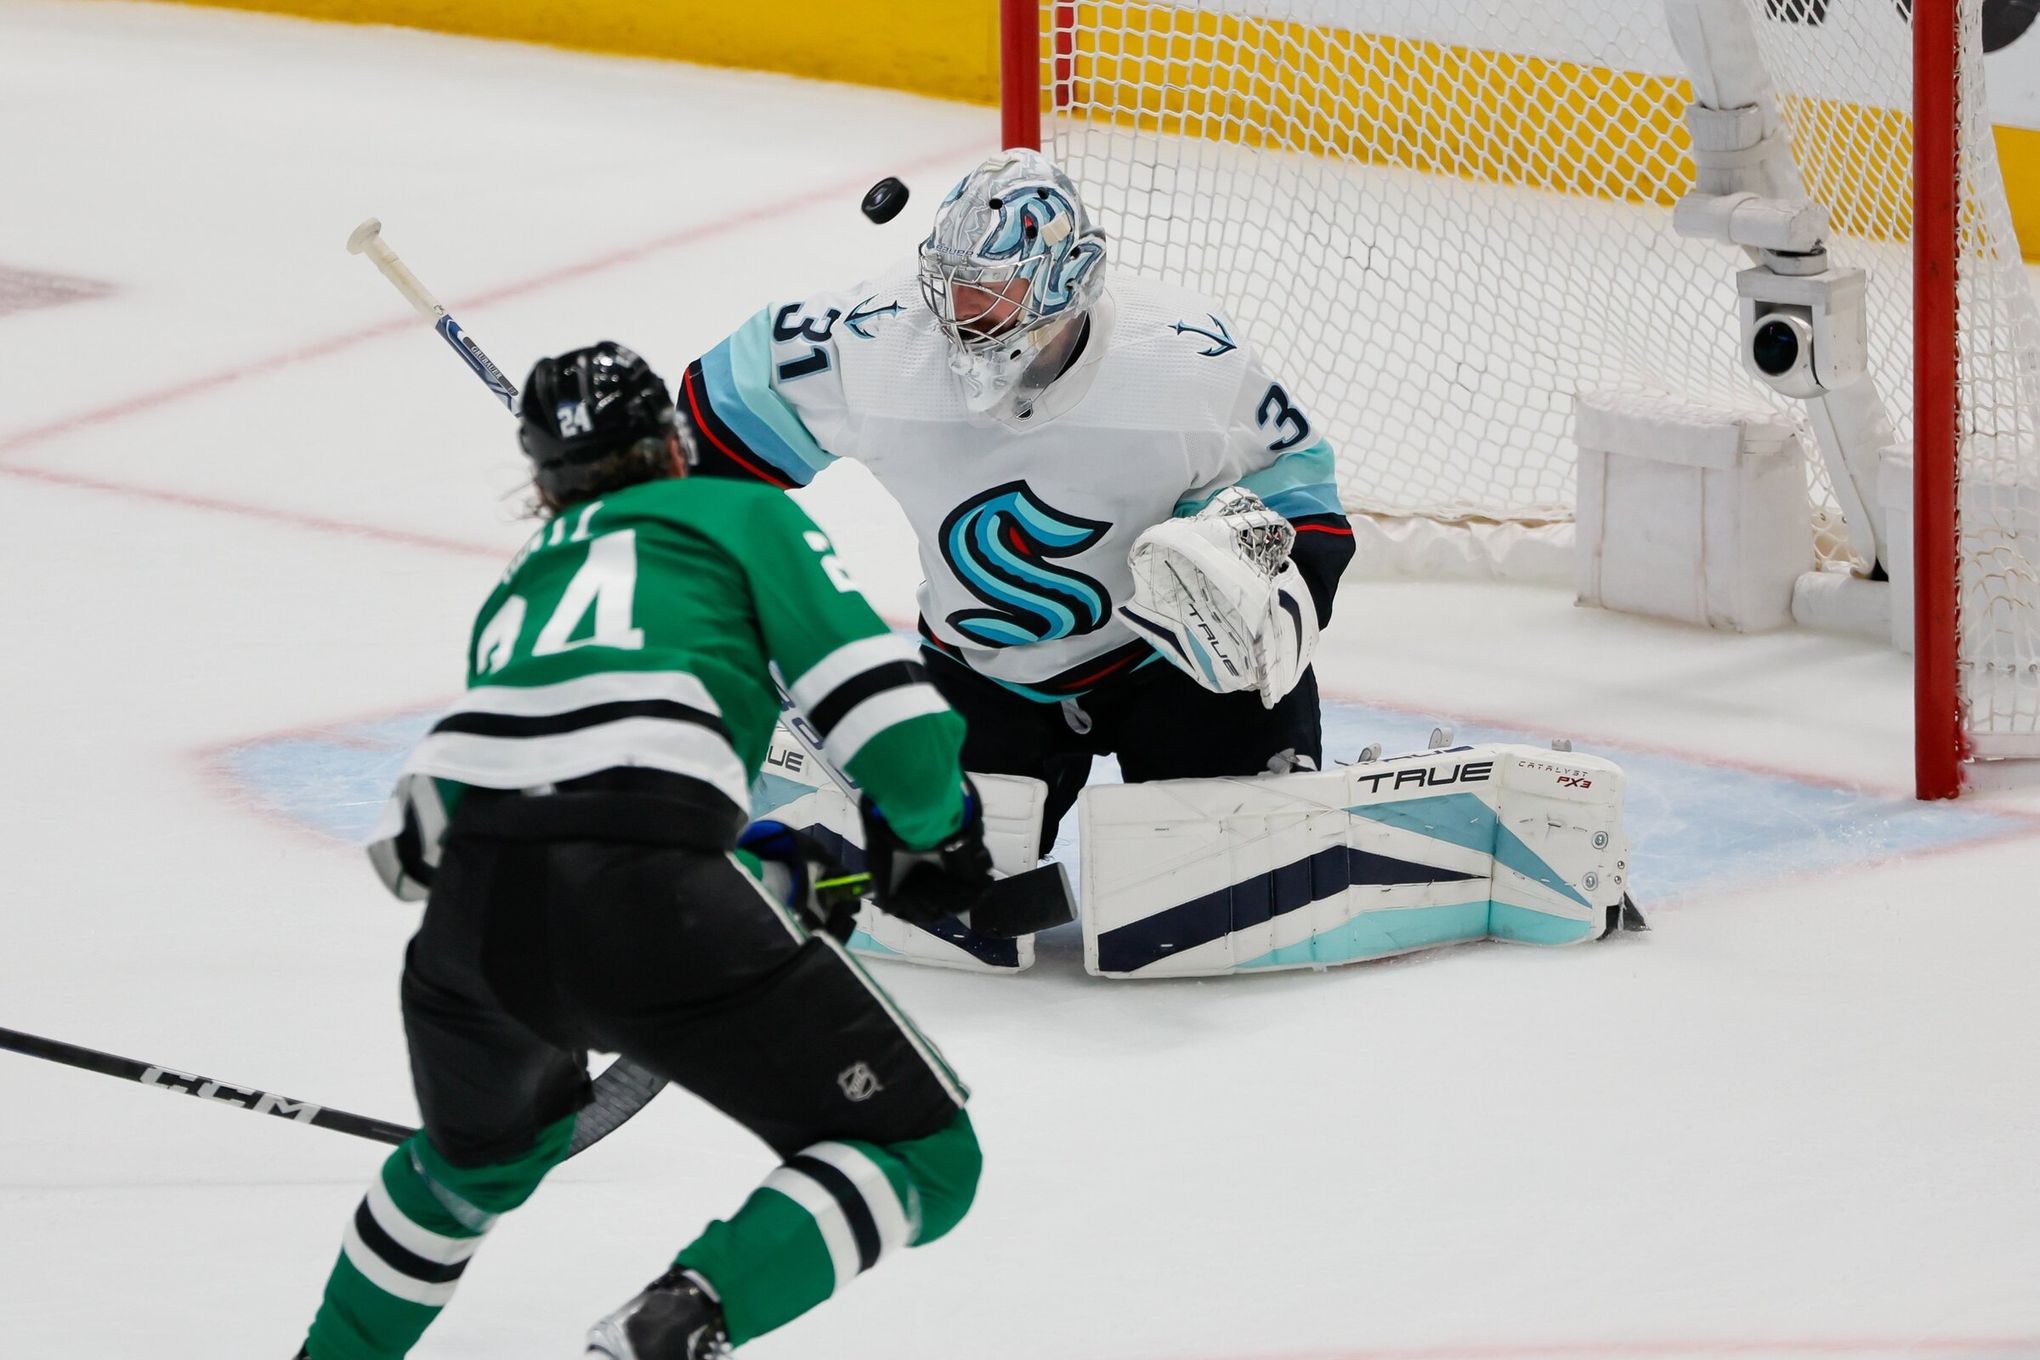 Tyler Seguin on Seattle Kraken vs. Stars: You See Why They Beat Colorado.  Seattle Is The Real Deal 